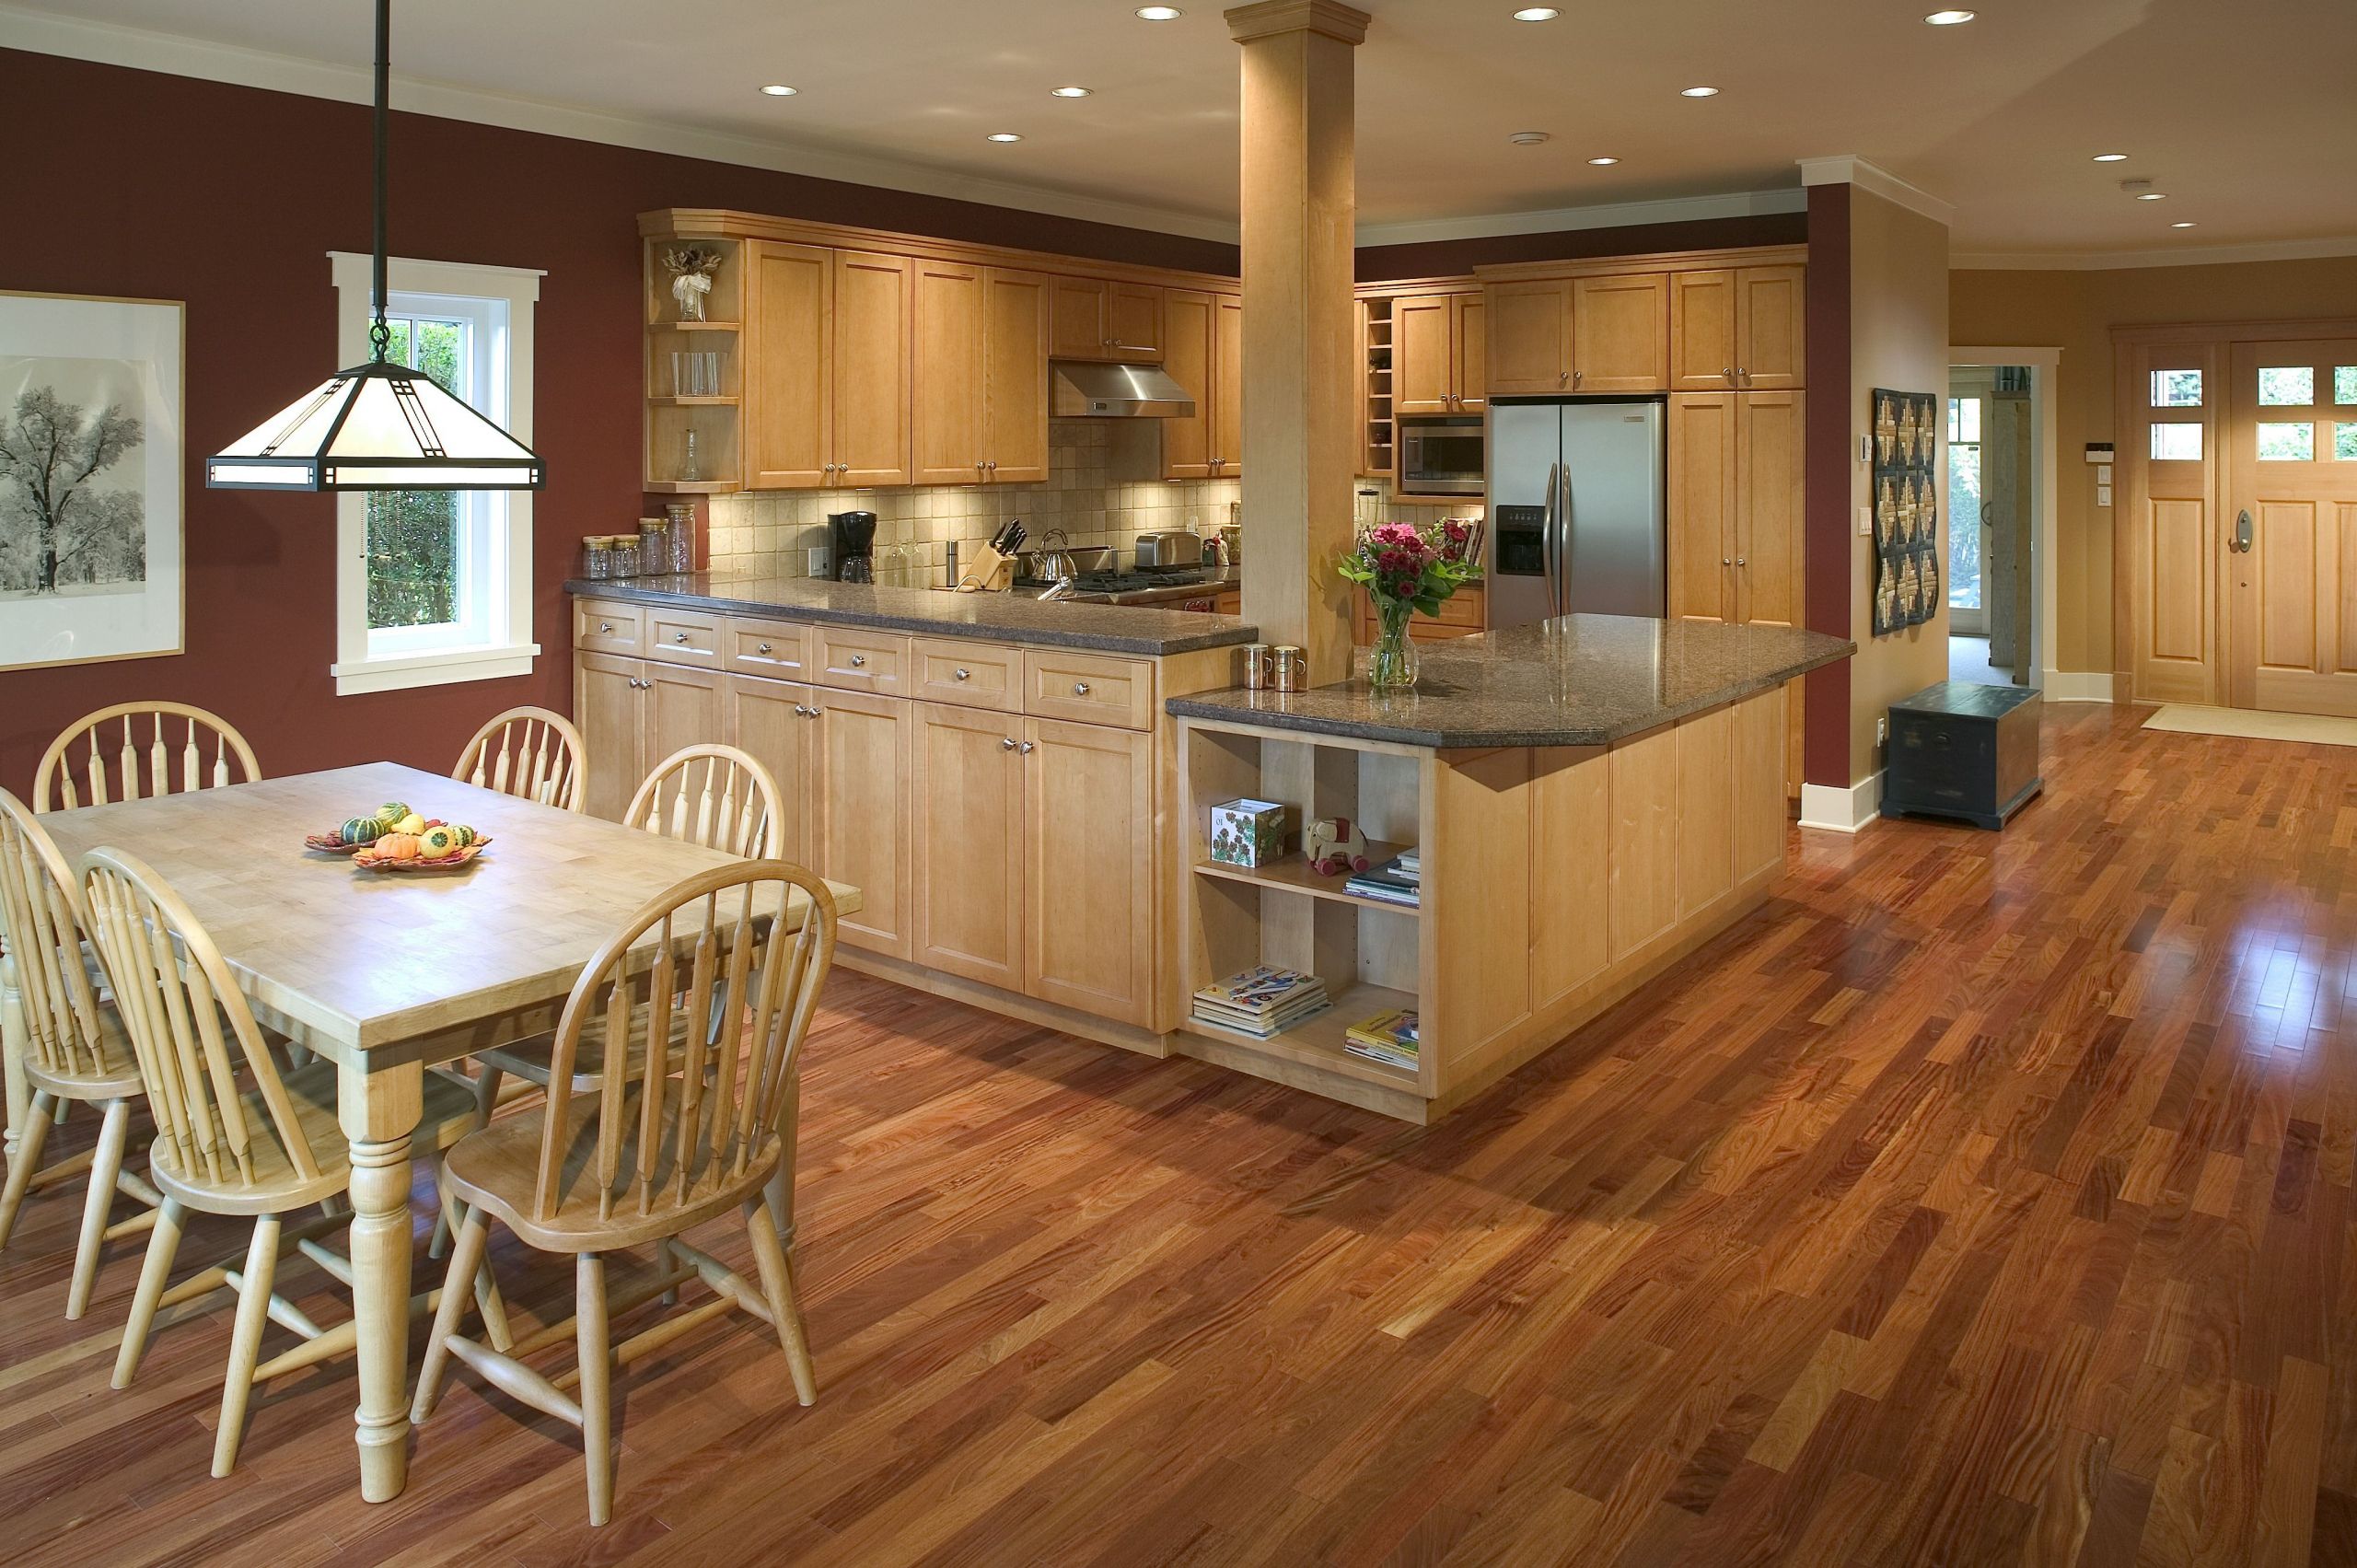 Small Kitchen Renovations Cost
 5 Questions to Ask Before All Kitchen Remodels